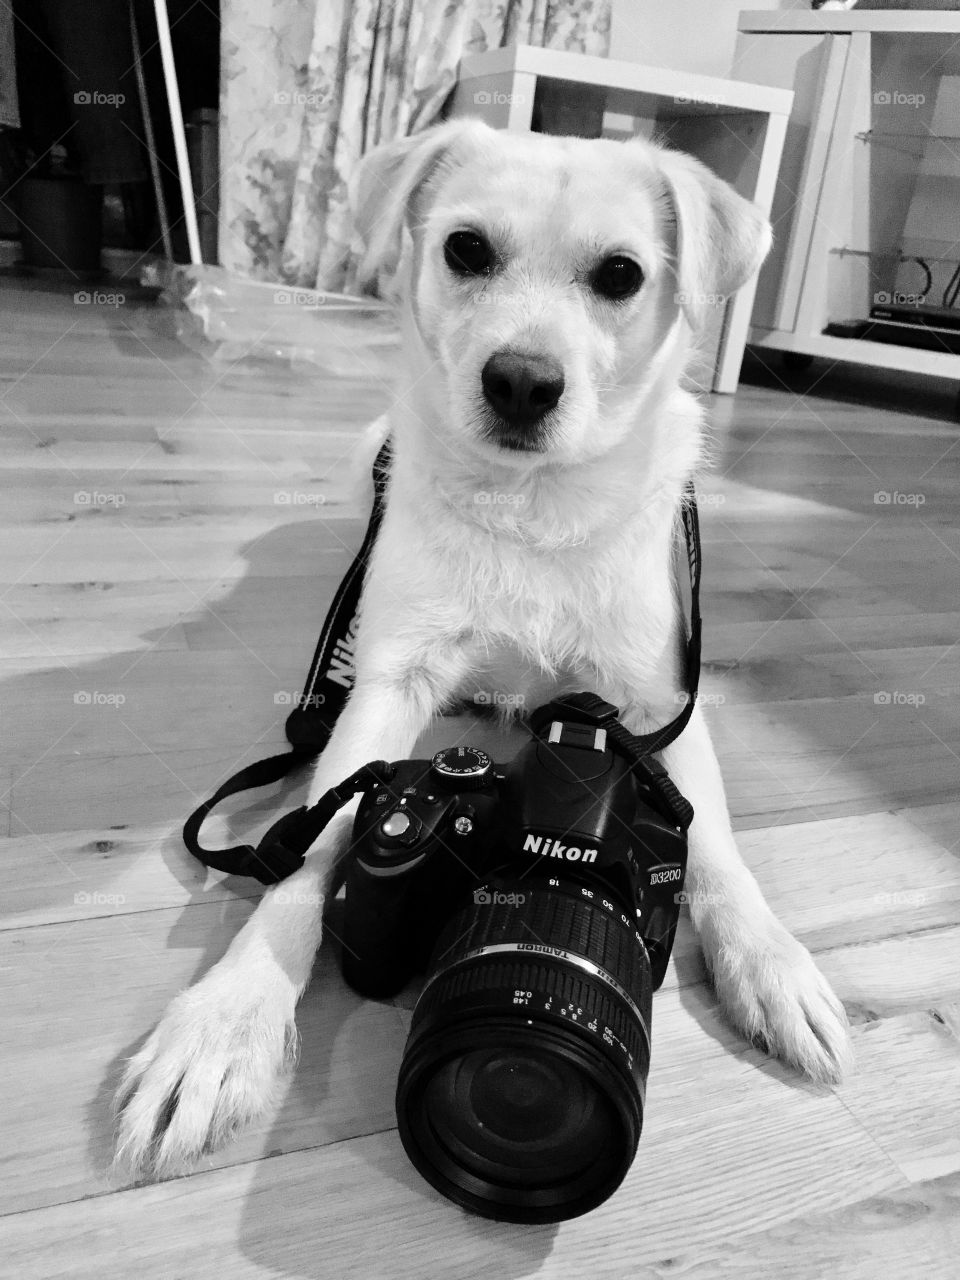 My dog is ready to take a picture